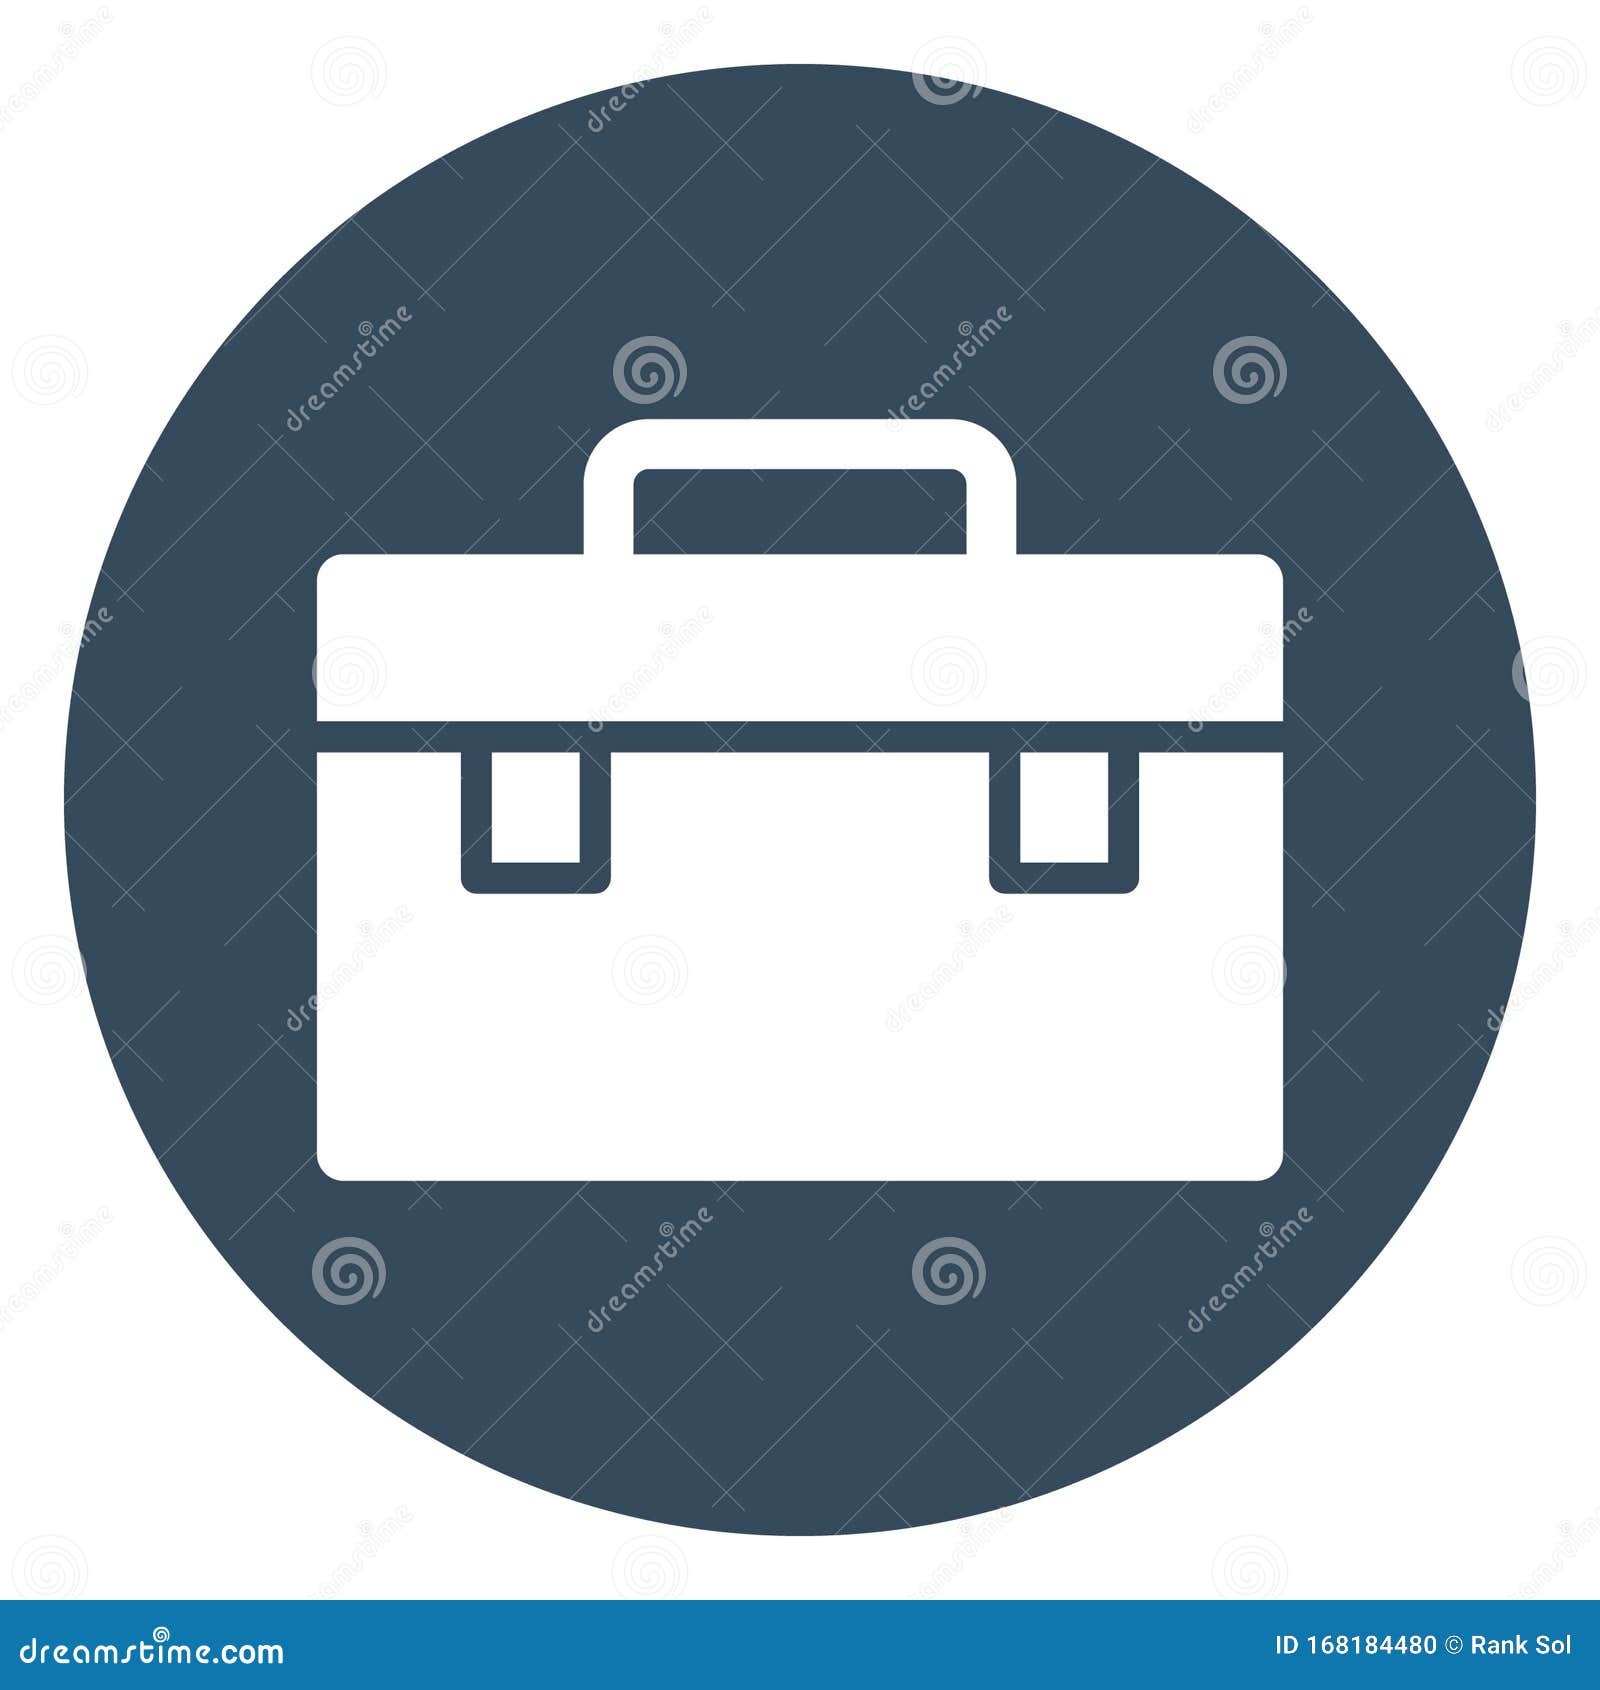 bag, bookbag   icon which can be easily modified or edited